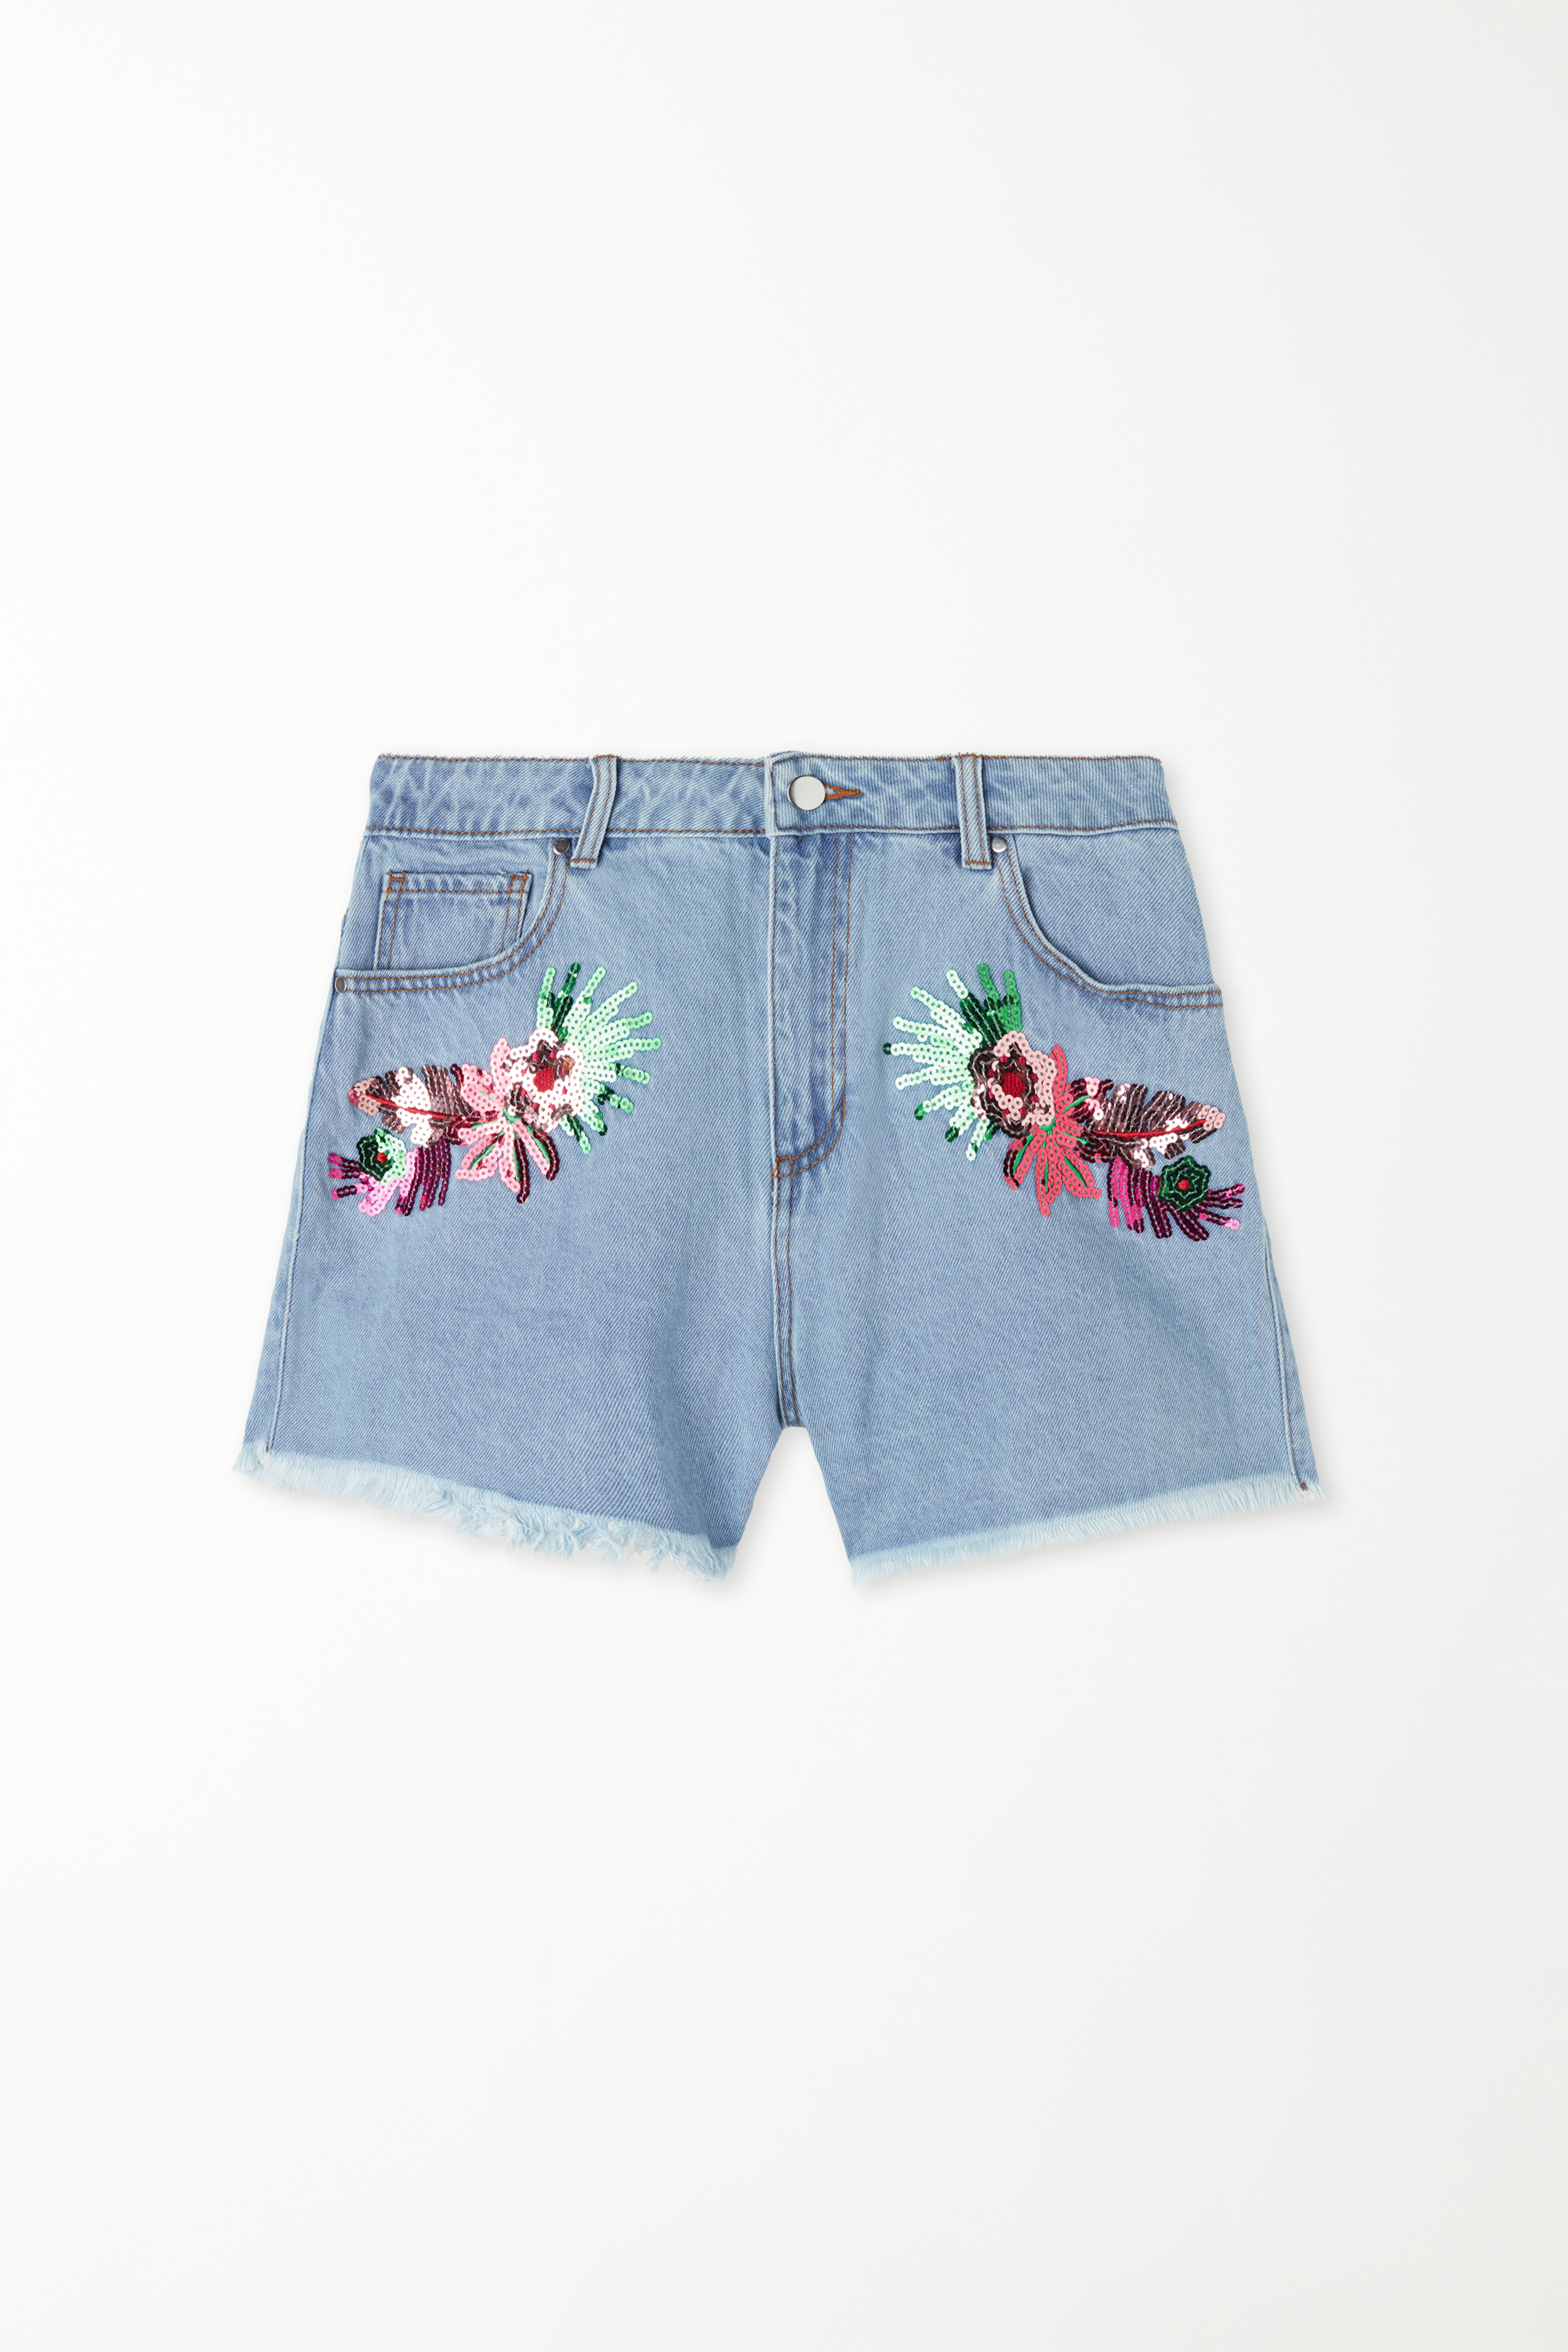 Sequin Embroidery Denim Shorts